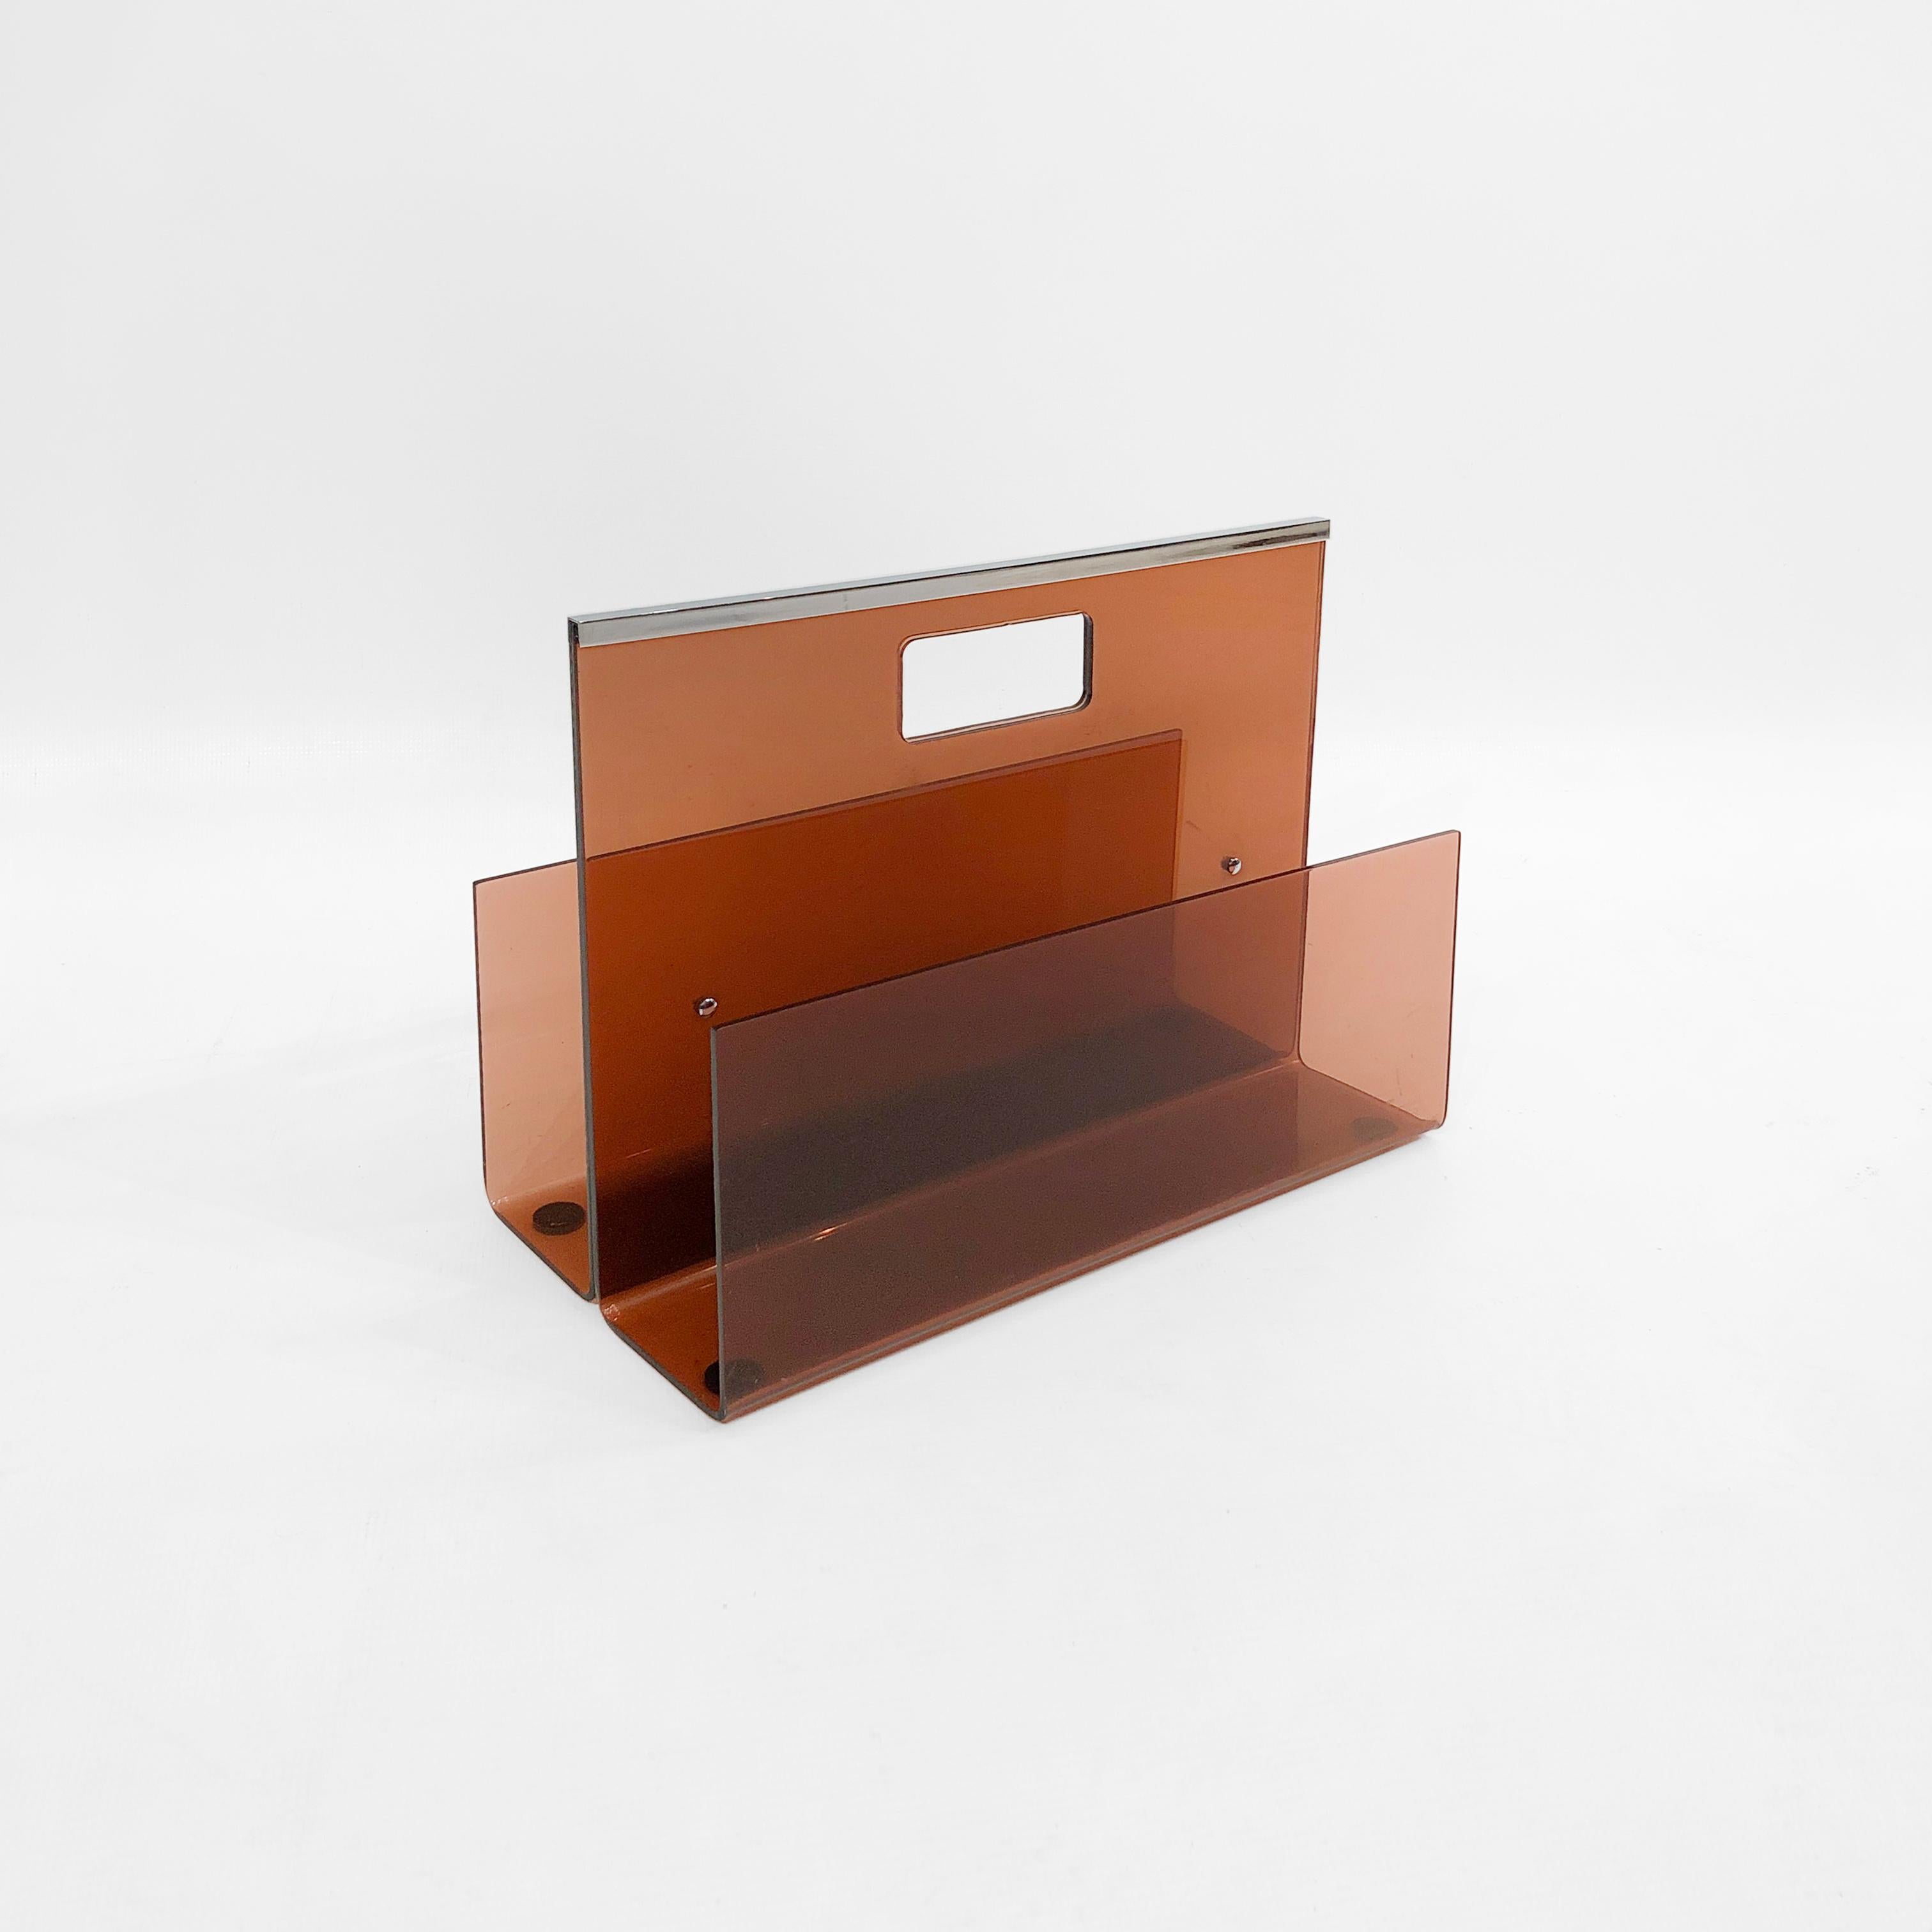 An impressive smoked acrylic magazine rack, coloured a translucent burnt orange, from acclaimed French designer Michel Dumas for Roche Bobois. 

Dumas worked almost exclusively in plexiglas, and here we find sleek modernist straight lines